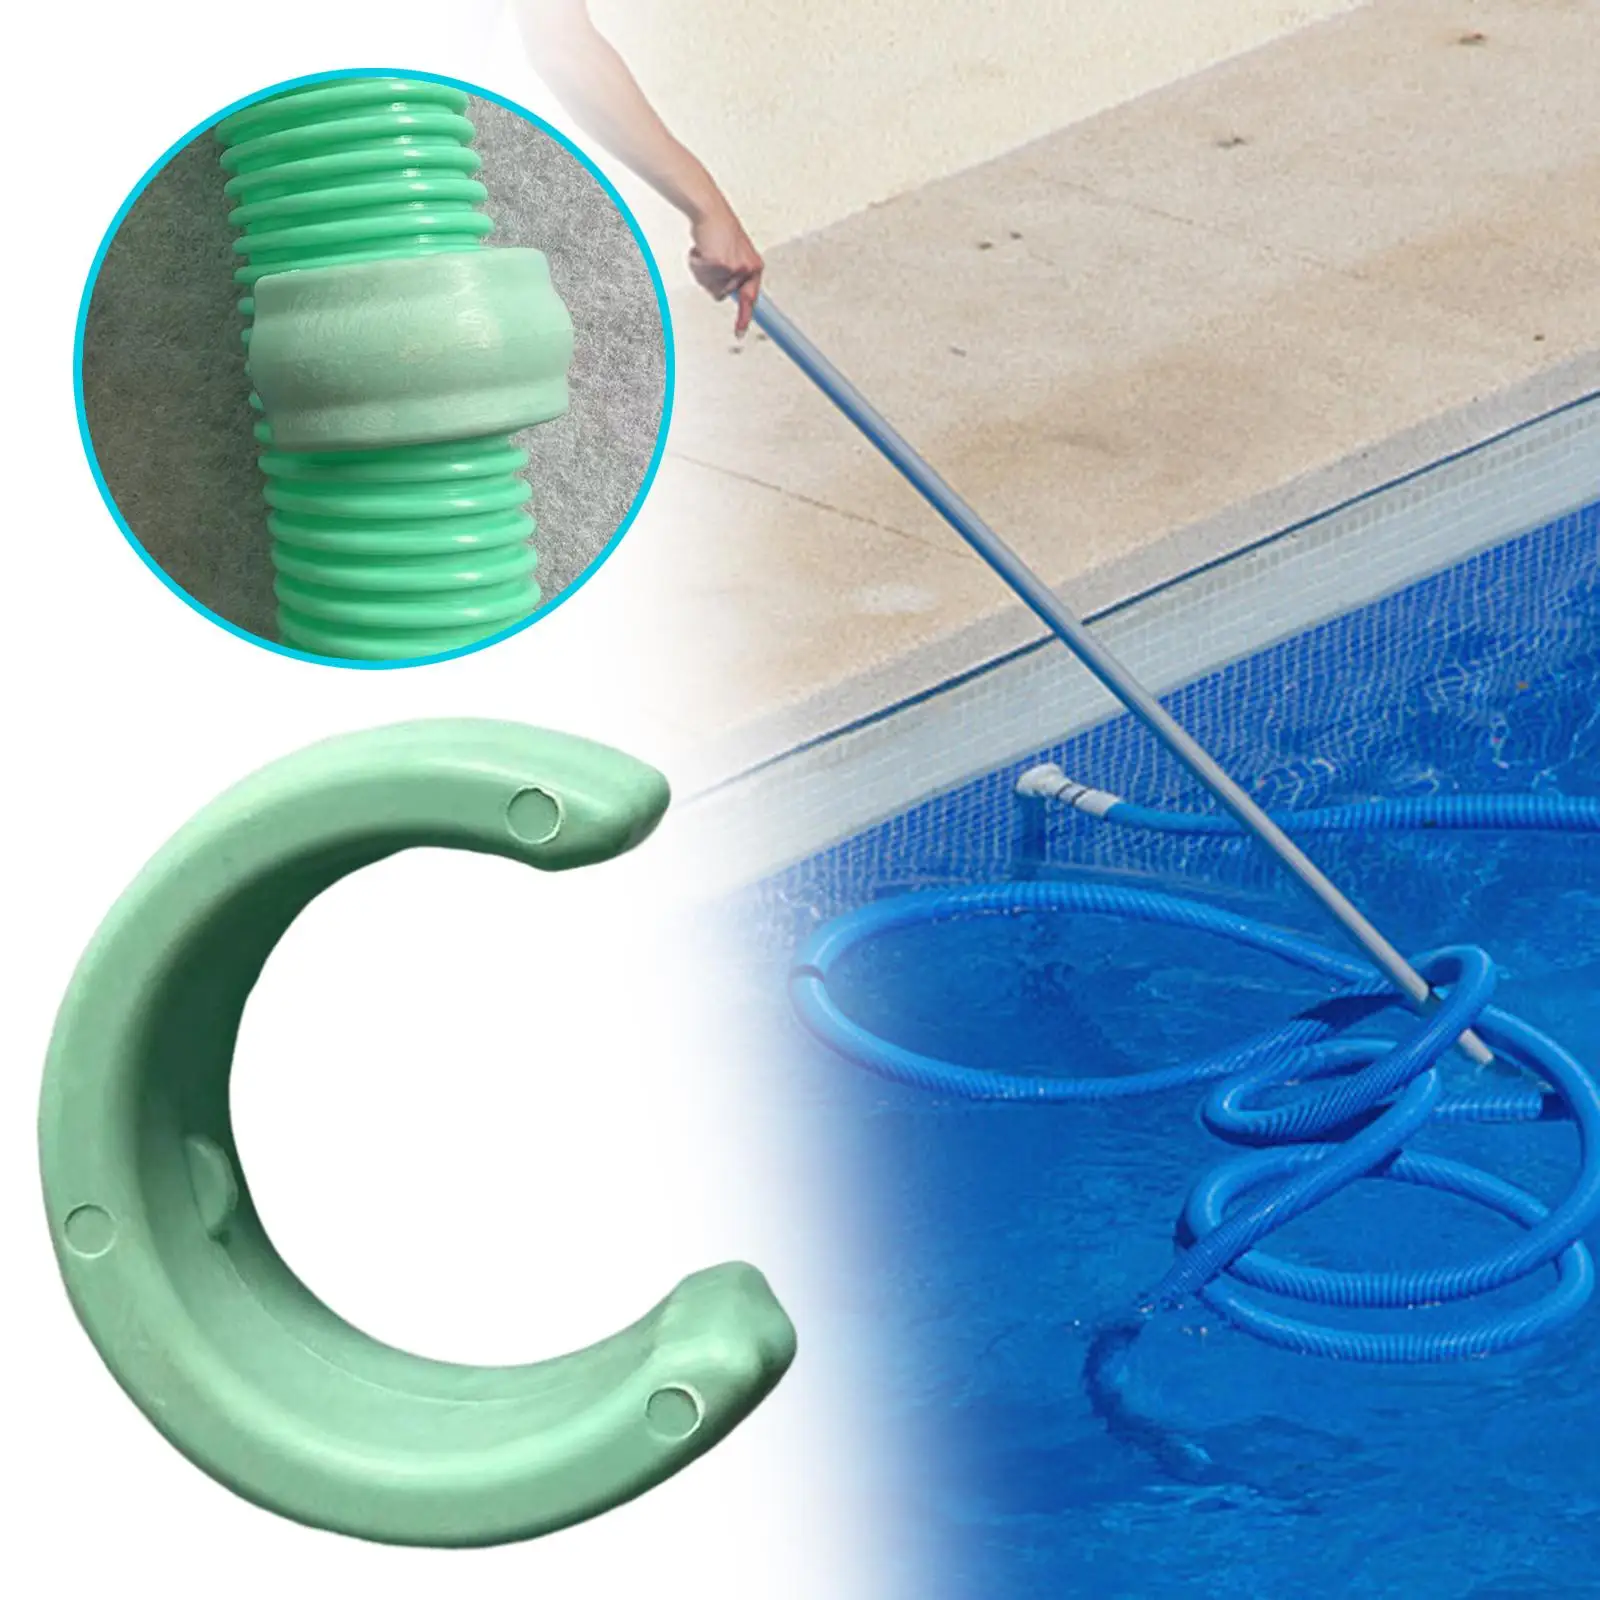 Universal Pool Cleaner Hose Weight for W83247 Pool Cleaning Tools Keep The Crawler Hose under Water Pool Cleaner Hose Weight